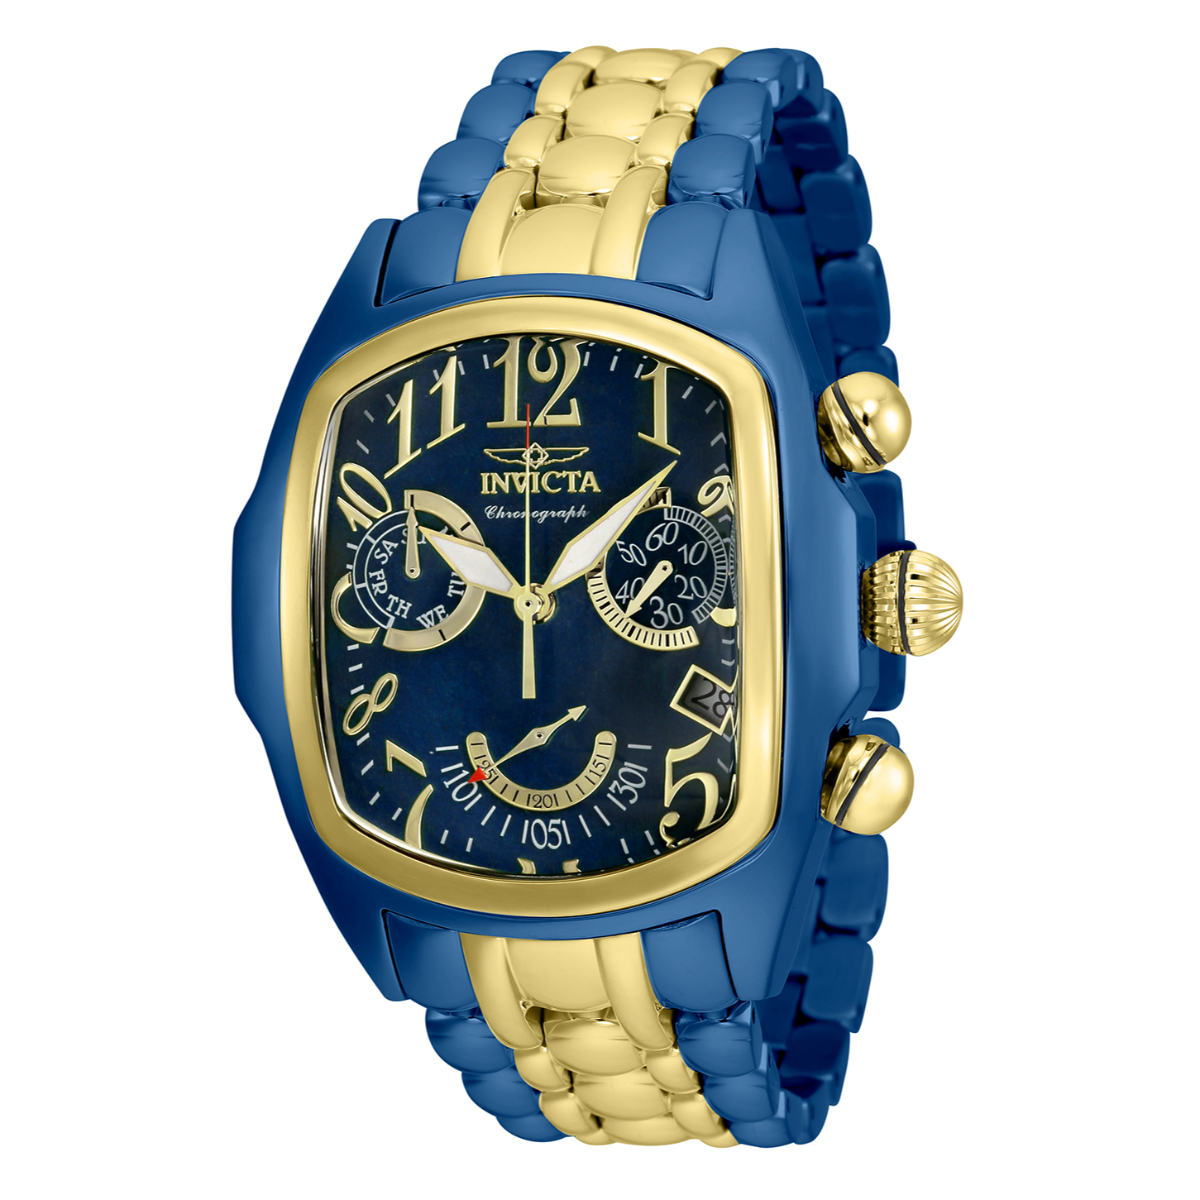 Invicta Lupah Men's Watch w/ Mother of Pearl Dial - 44.5mm, Blue, Gold (36192)